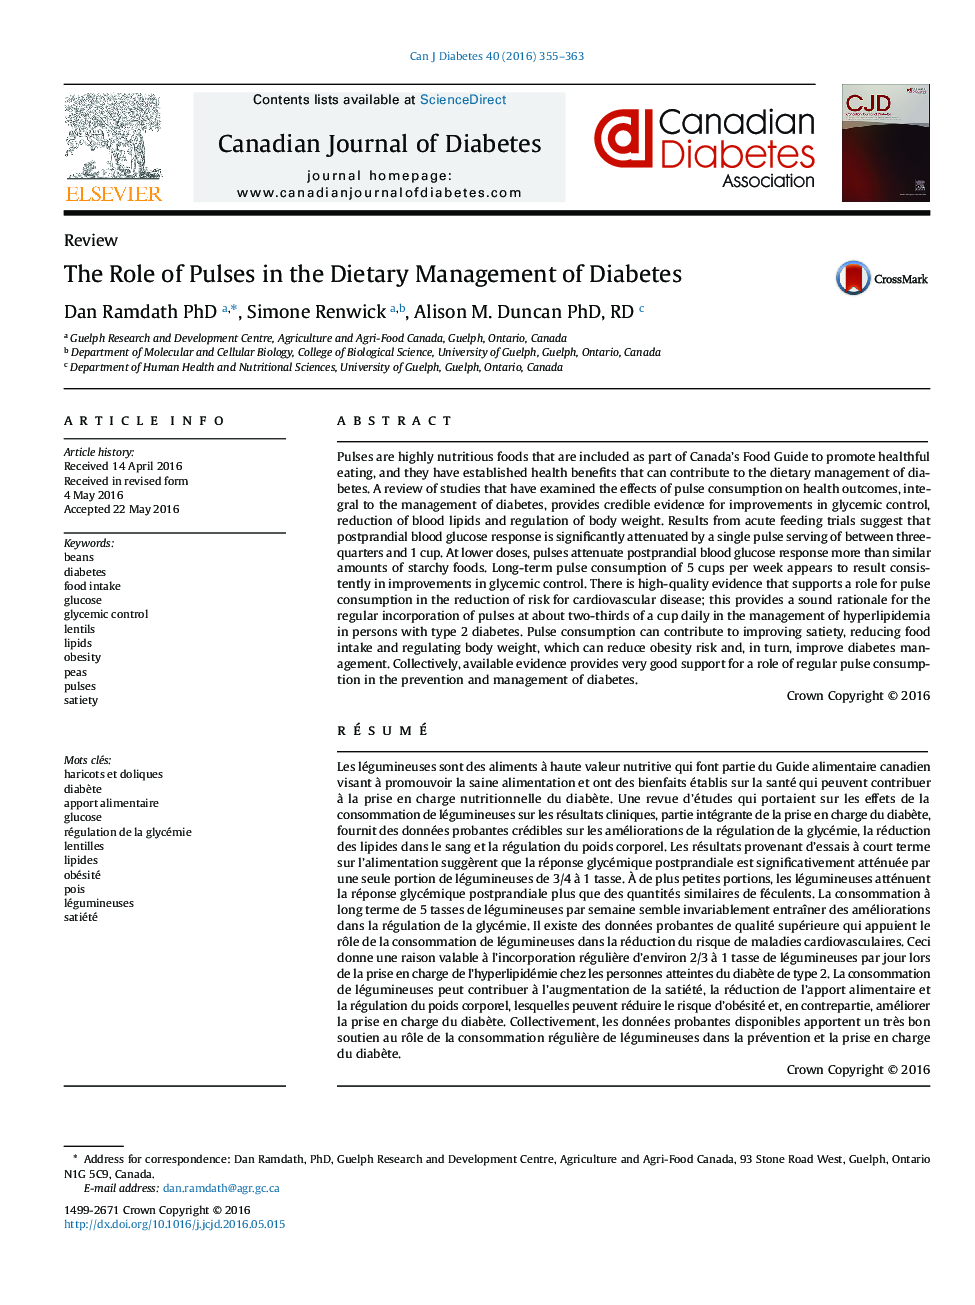 The Role of Pulses in the Dietary Management of Diabetes